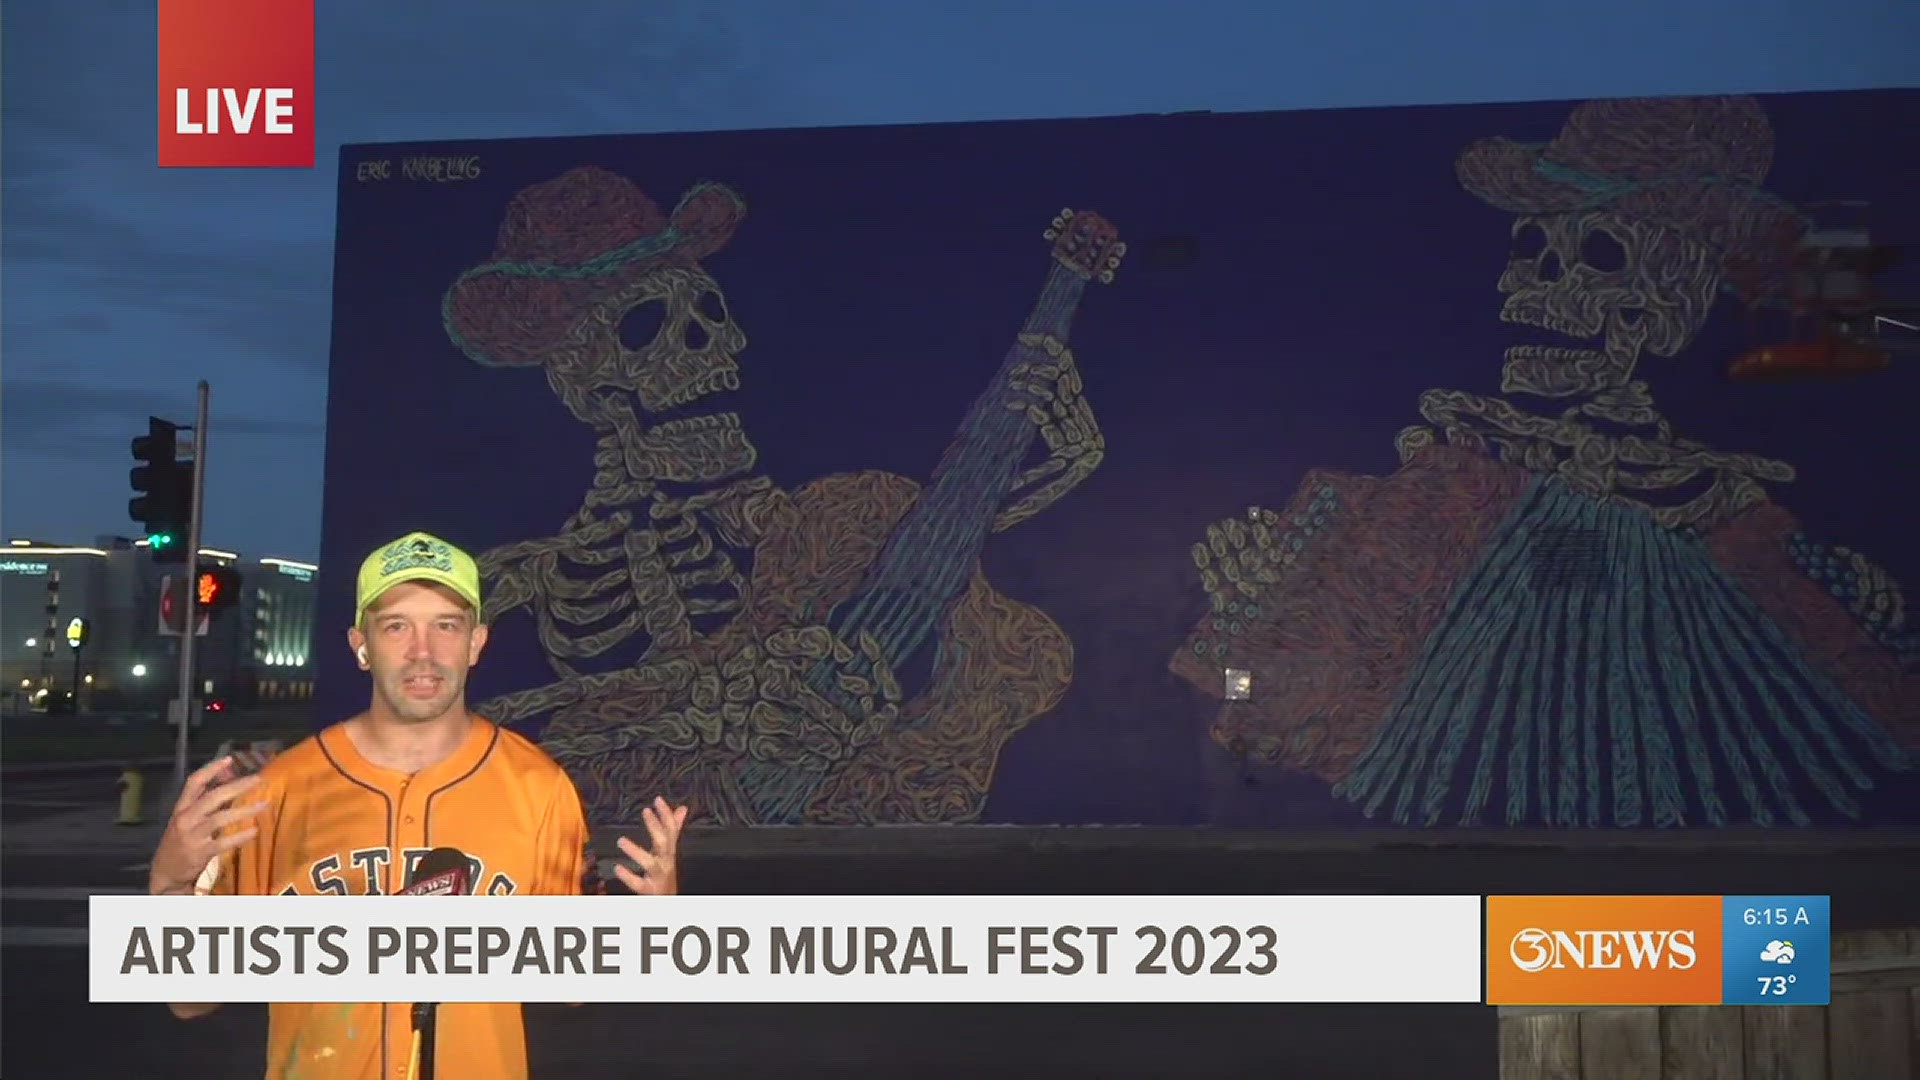 Eric Karbeling joined First Edition to talk about the Tejano-influenced mural he is working on for the festival.